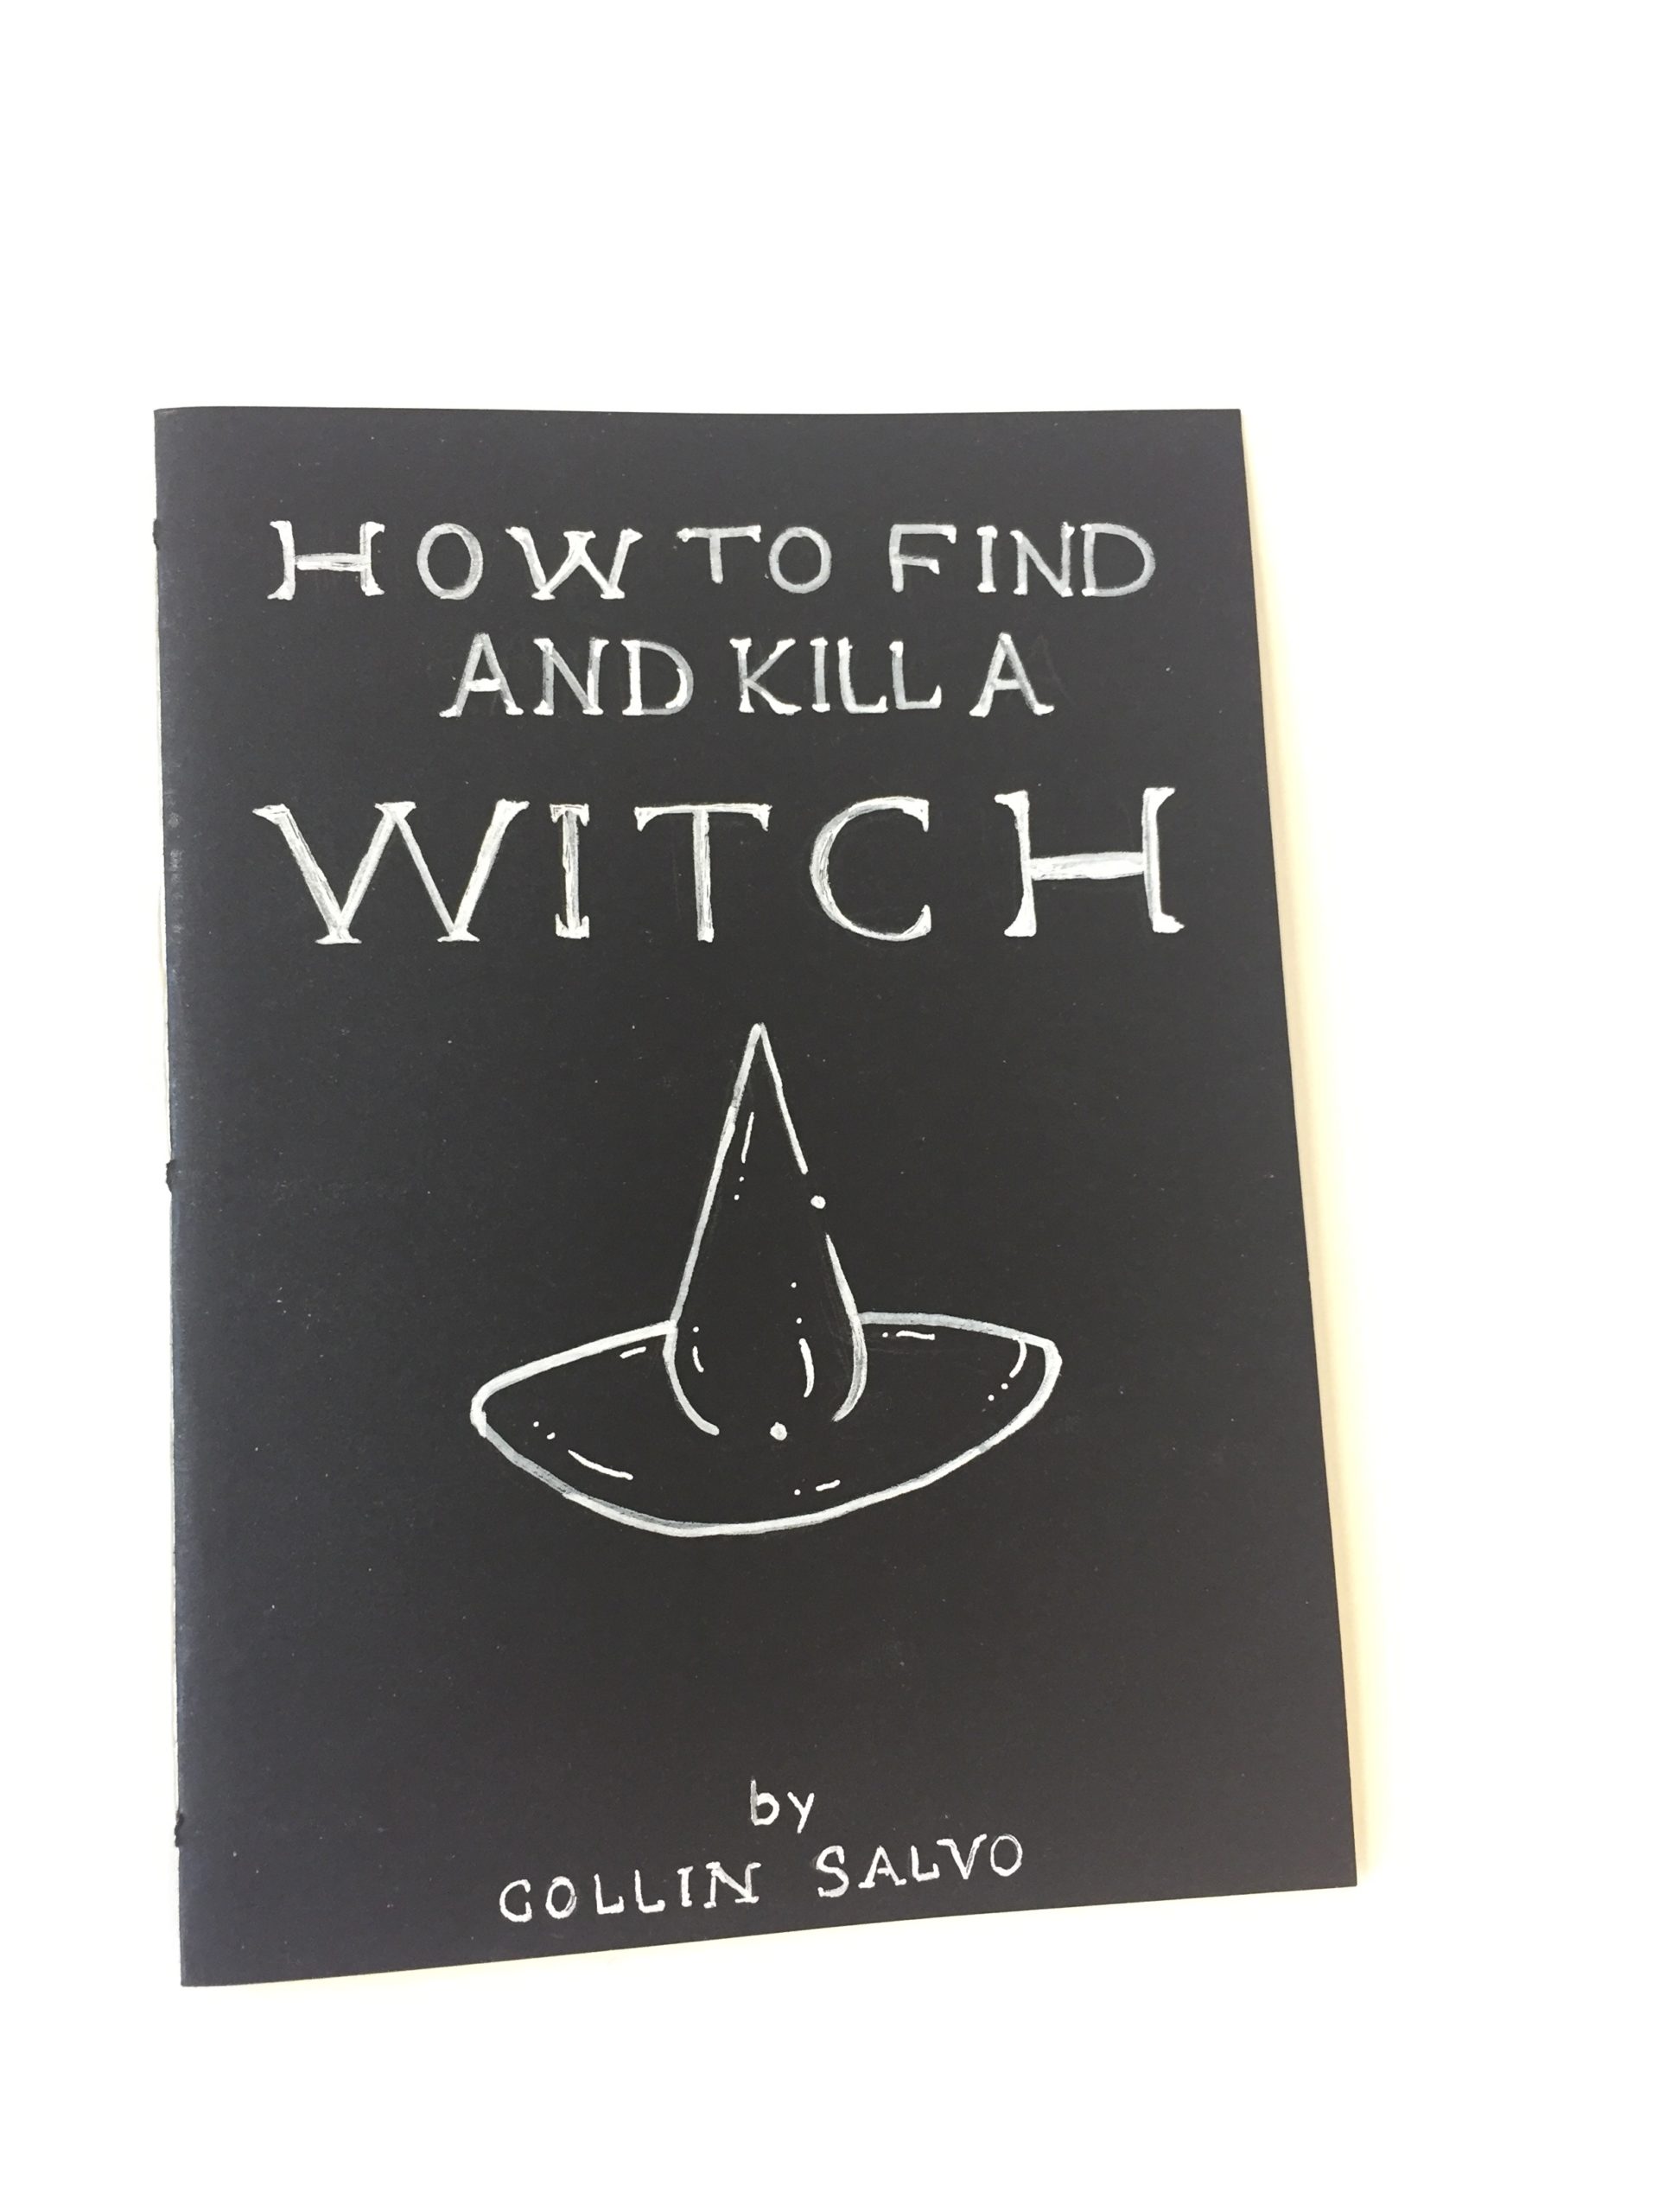 Collin Salvo, “How to Find and Kill a Witch,” Hand drawn and Painted Zine, 5.5″x4.25″, AR330 Fibers I, Fall 2018